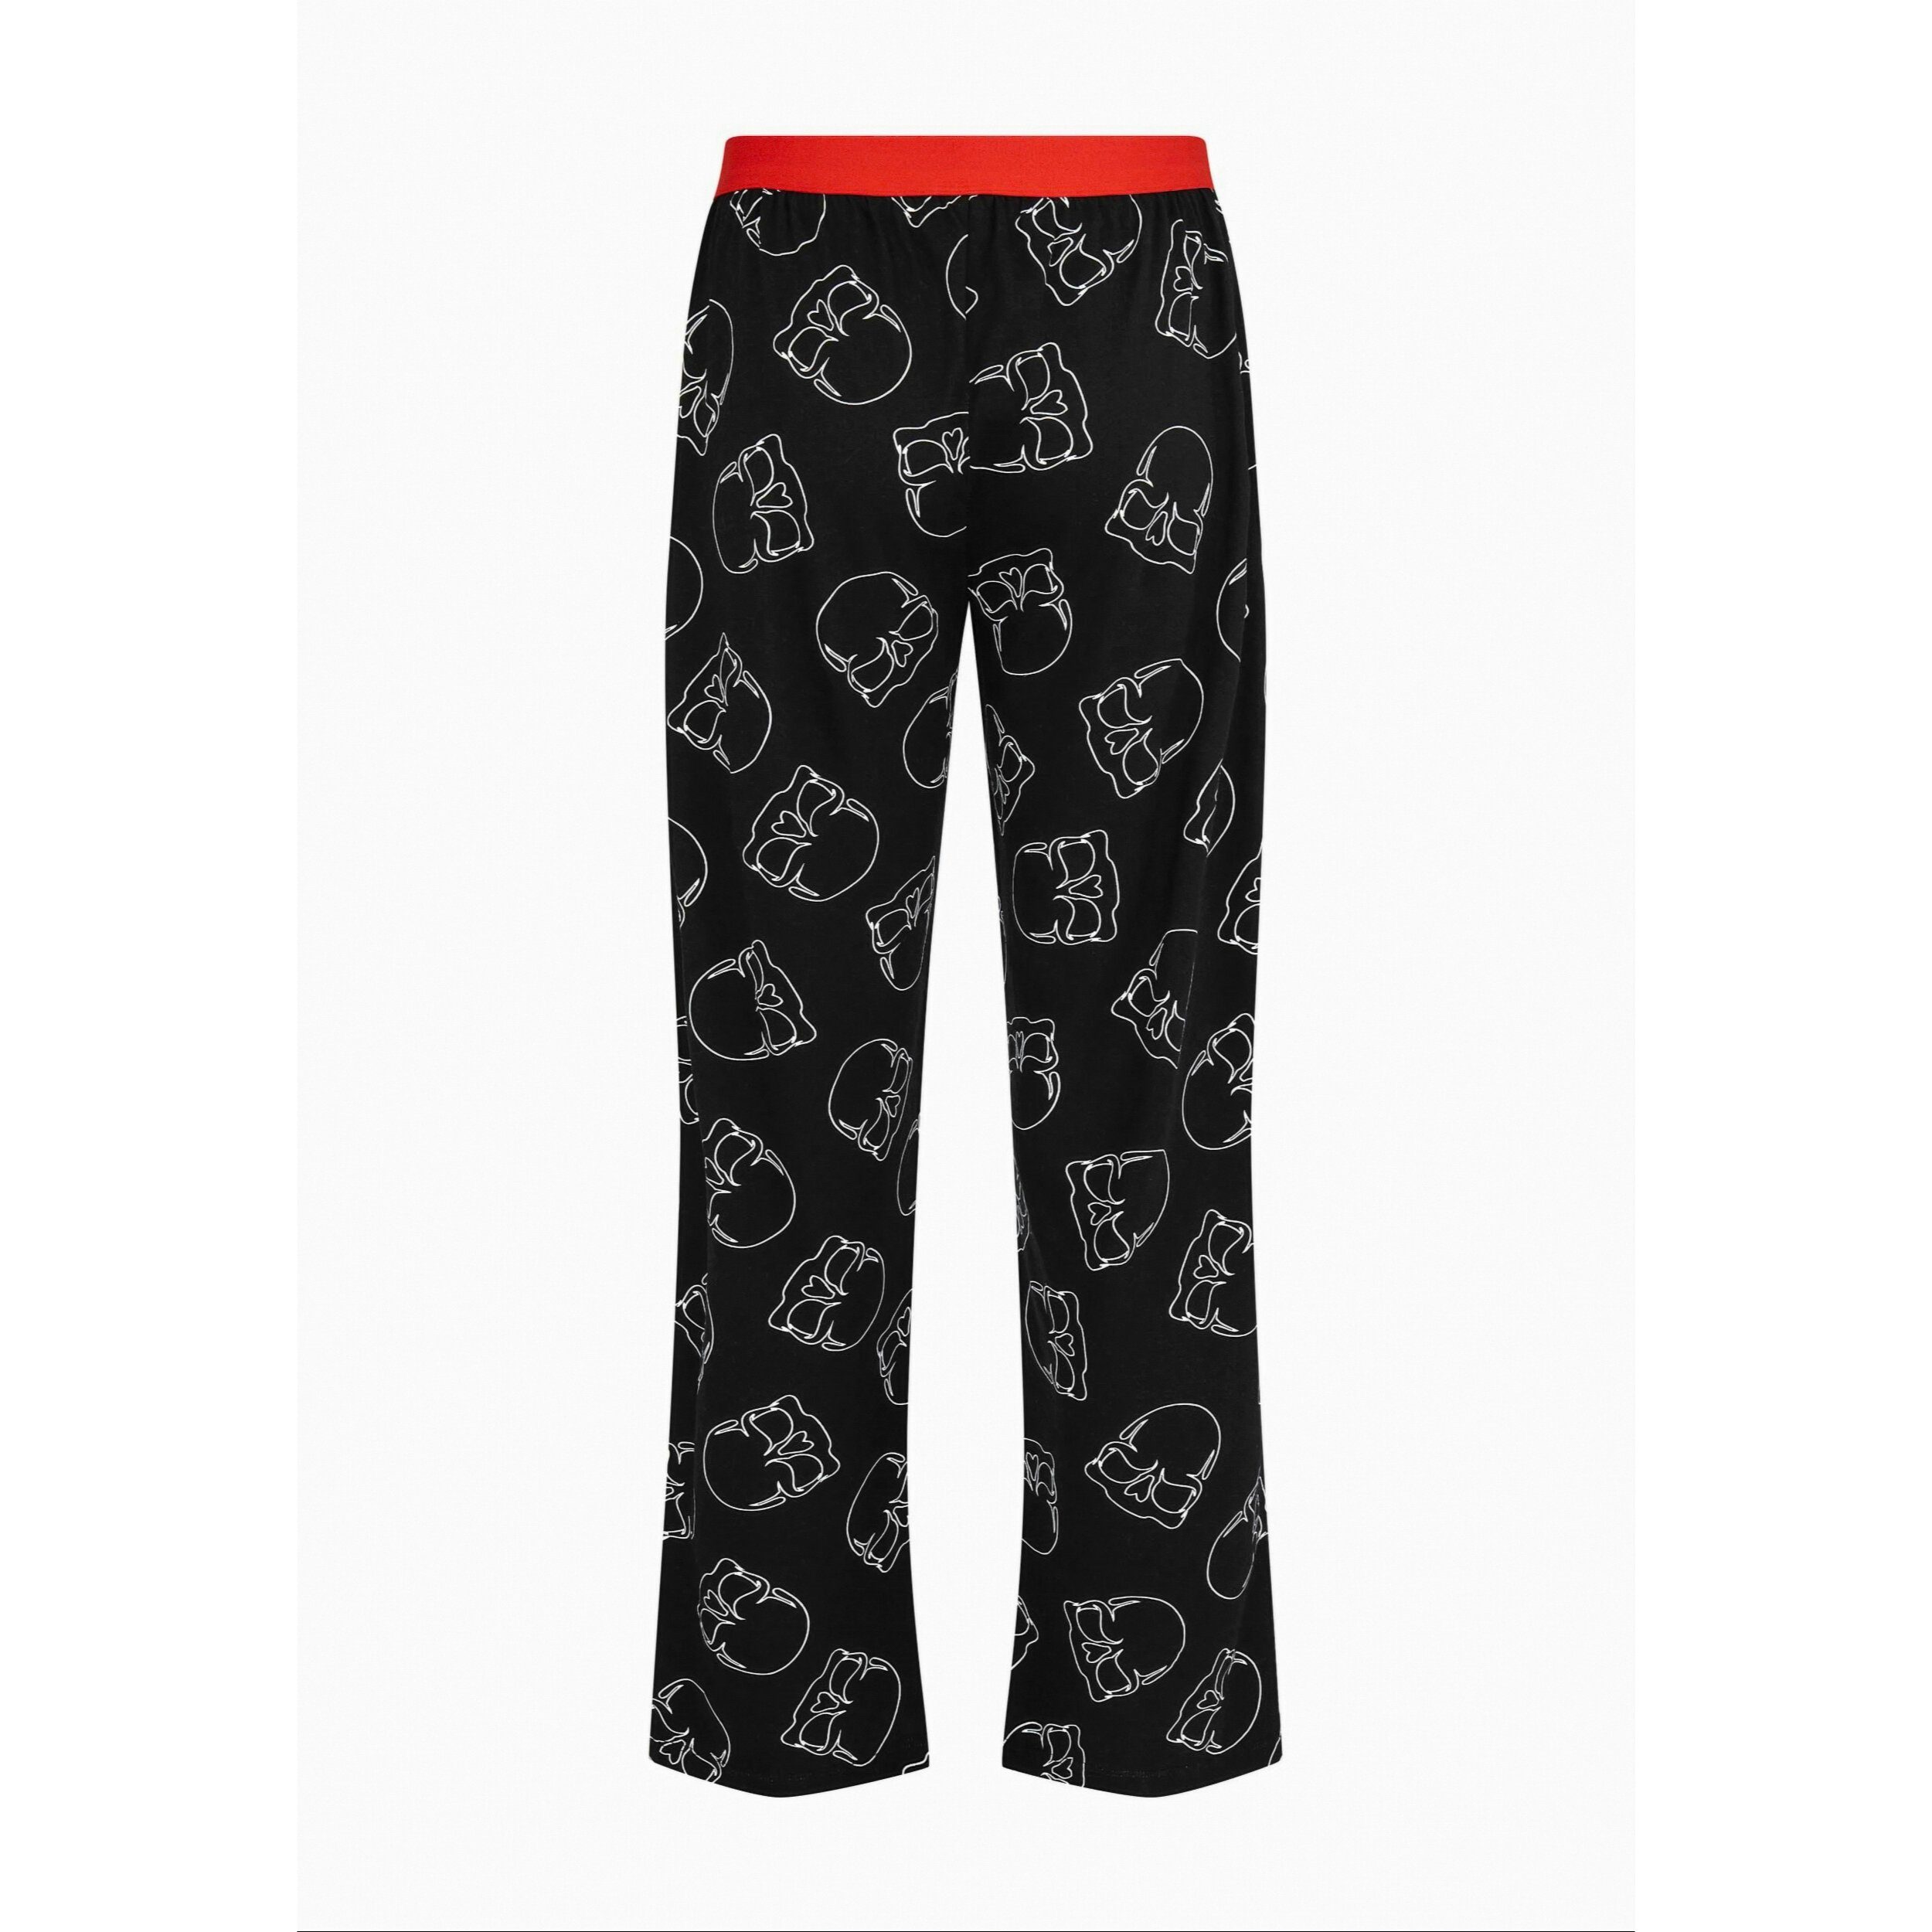 - Outline Loungepant of Loungepants Skull Recovered Call Duty -